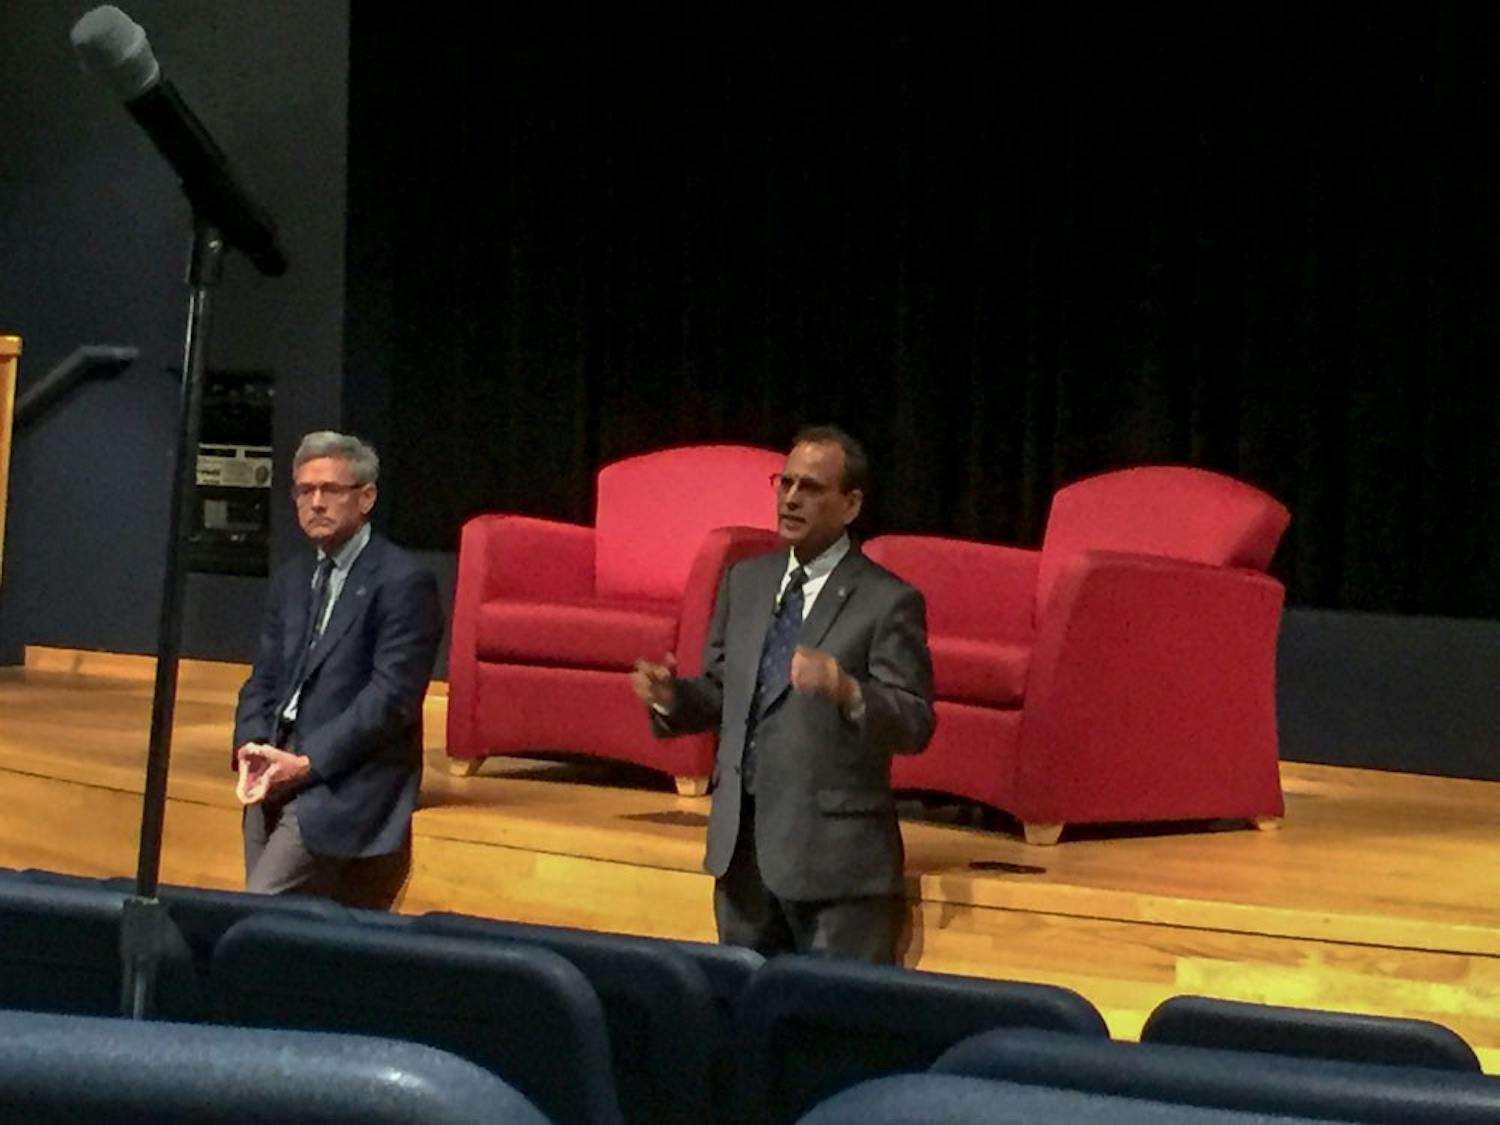 UB president Satish Tripathi and provost Charles Zukoski held a town hall meeting for faculty members on Wednesday morning. Faculty from social sciences, arts and humanities asked questions about issues within their departments and the university at the meeting.